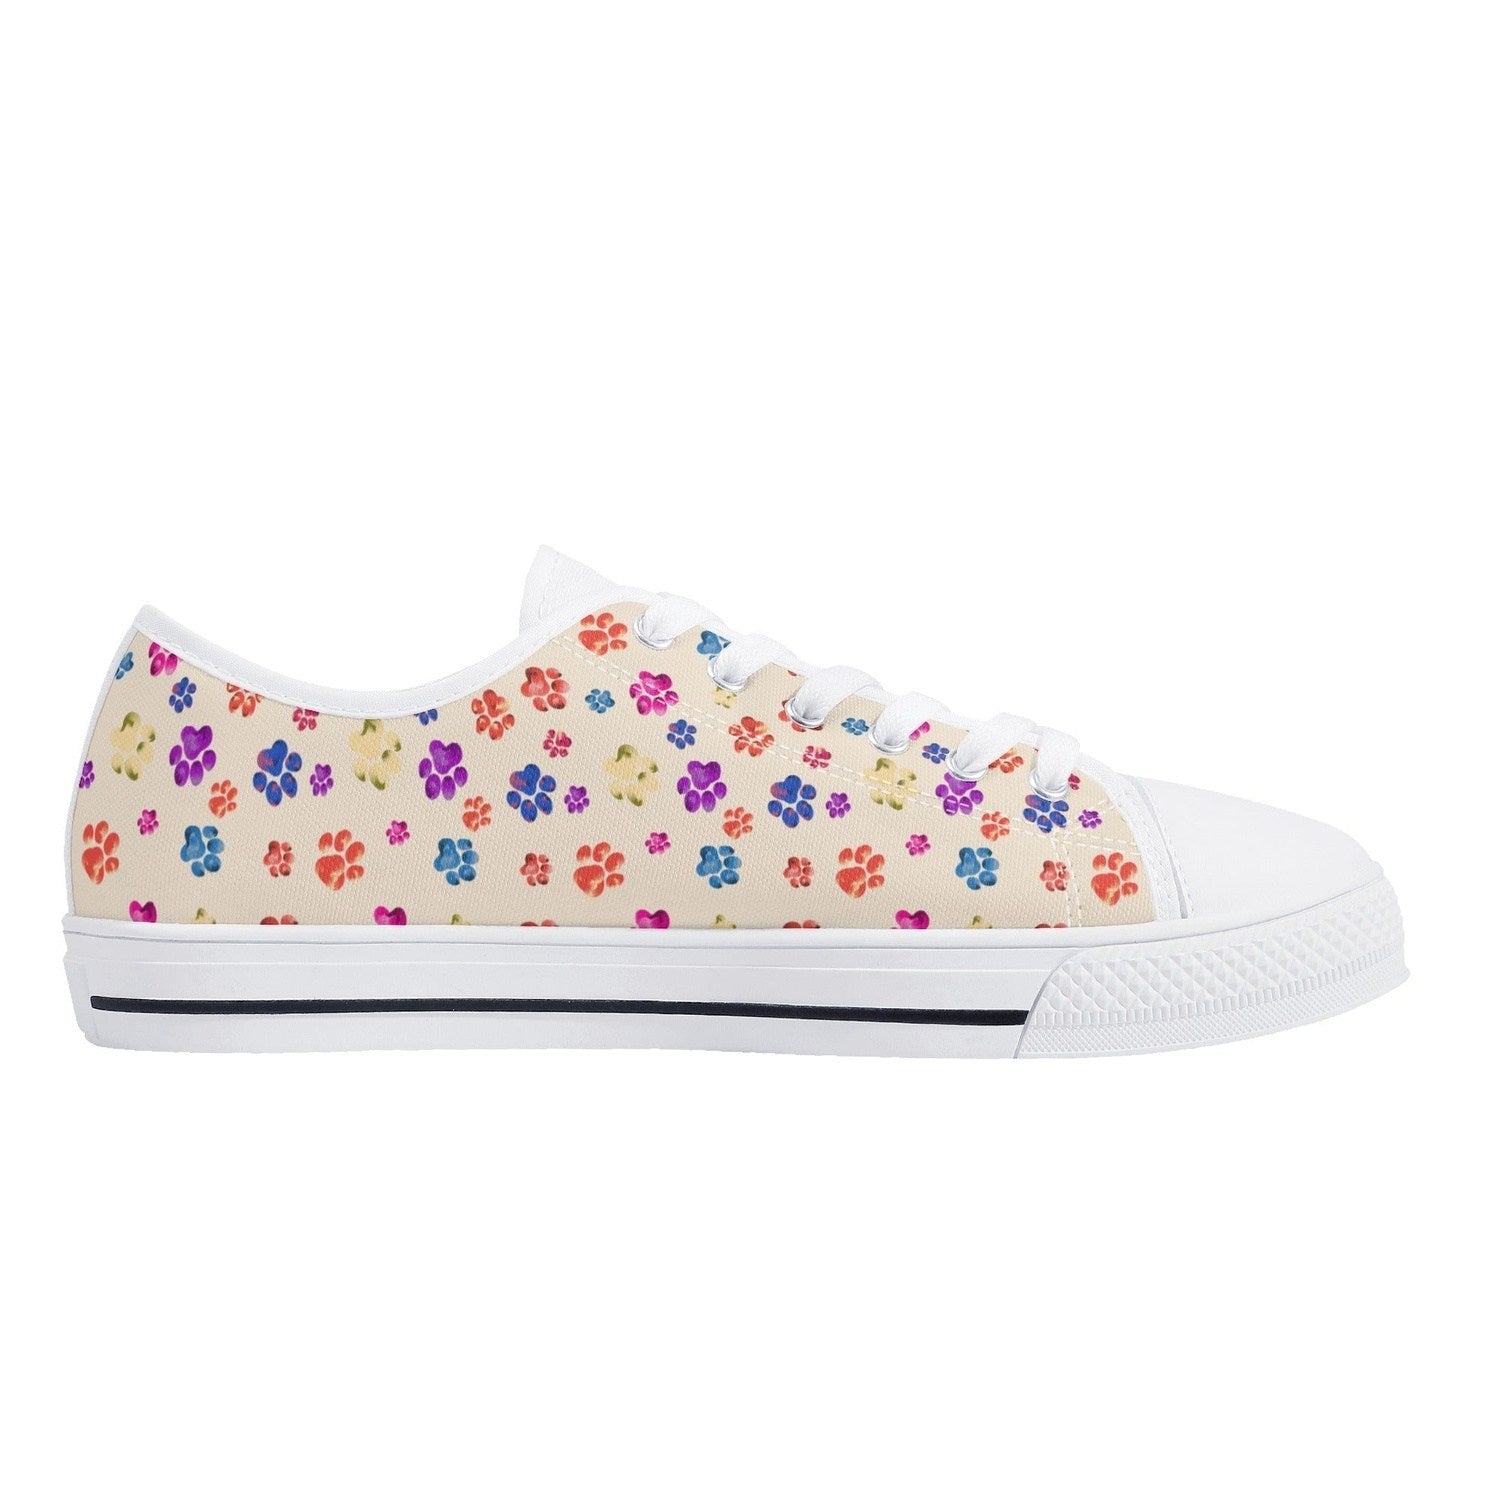 Painted Paws 2 Women's Low Top Canvas Shoes